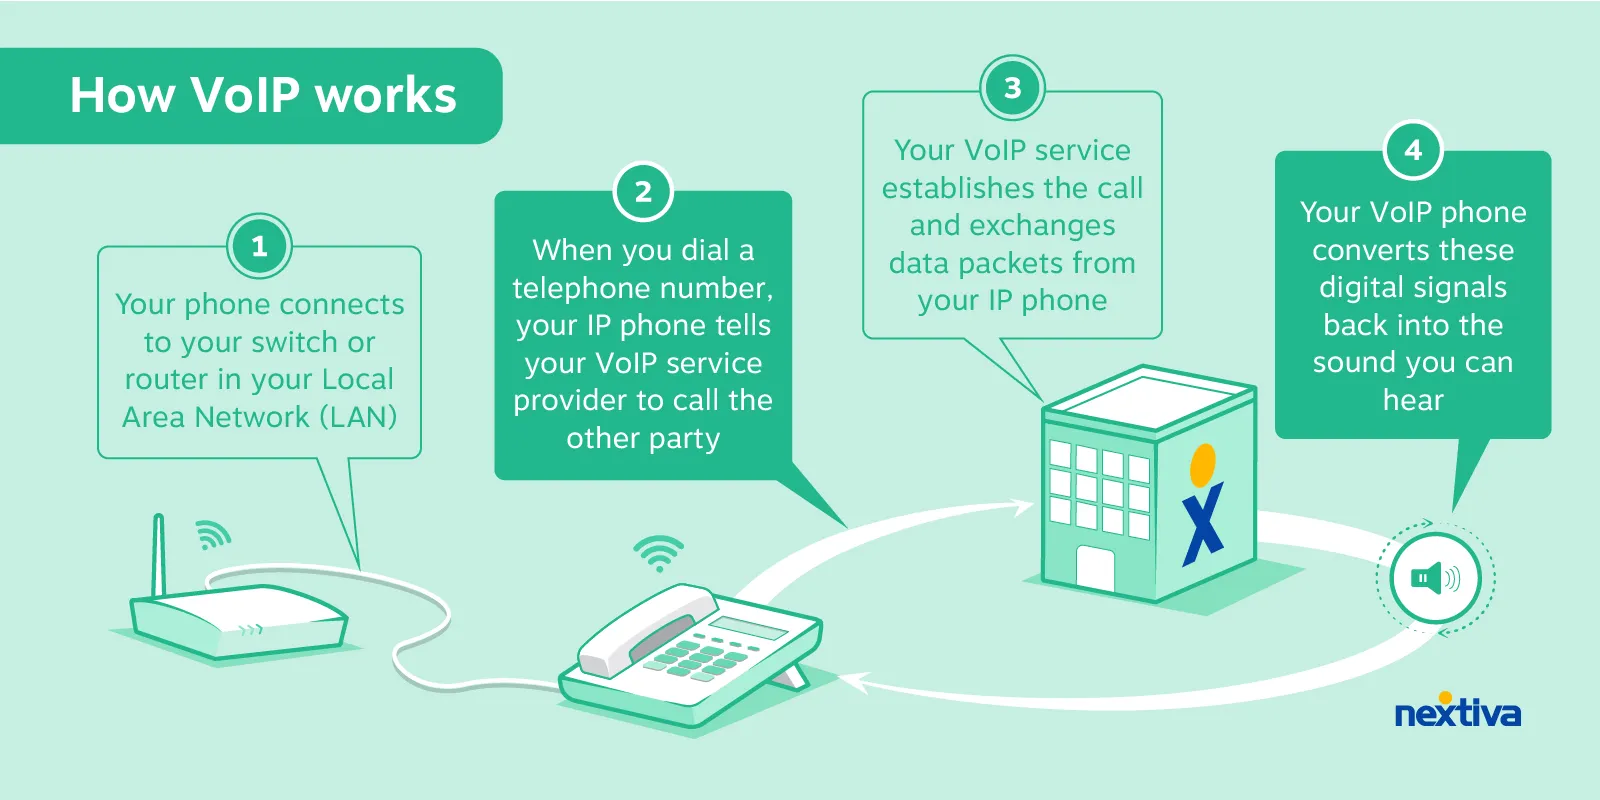 How VoIP works to connect telephone calls over the internet. (Illustration)